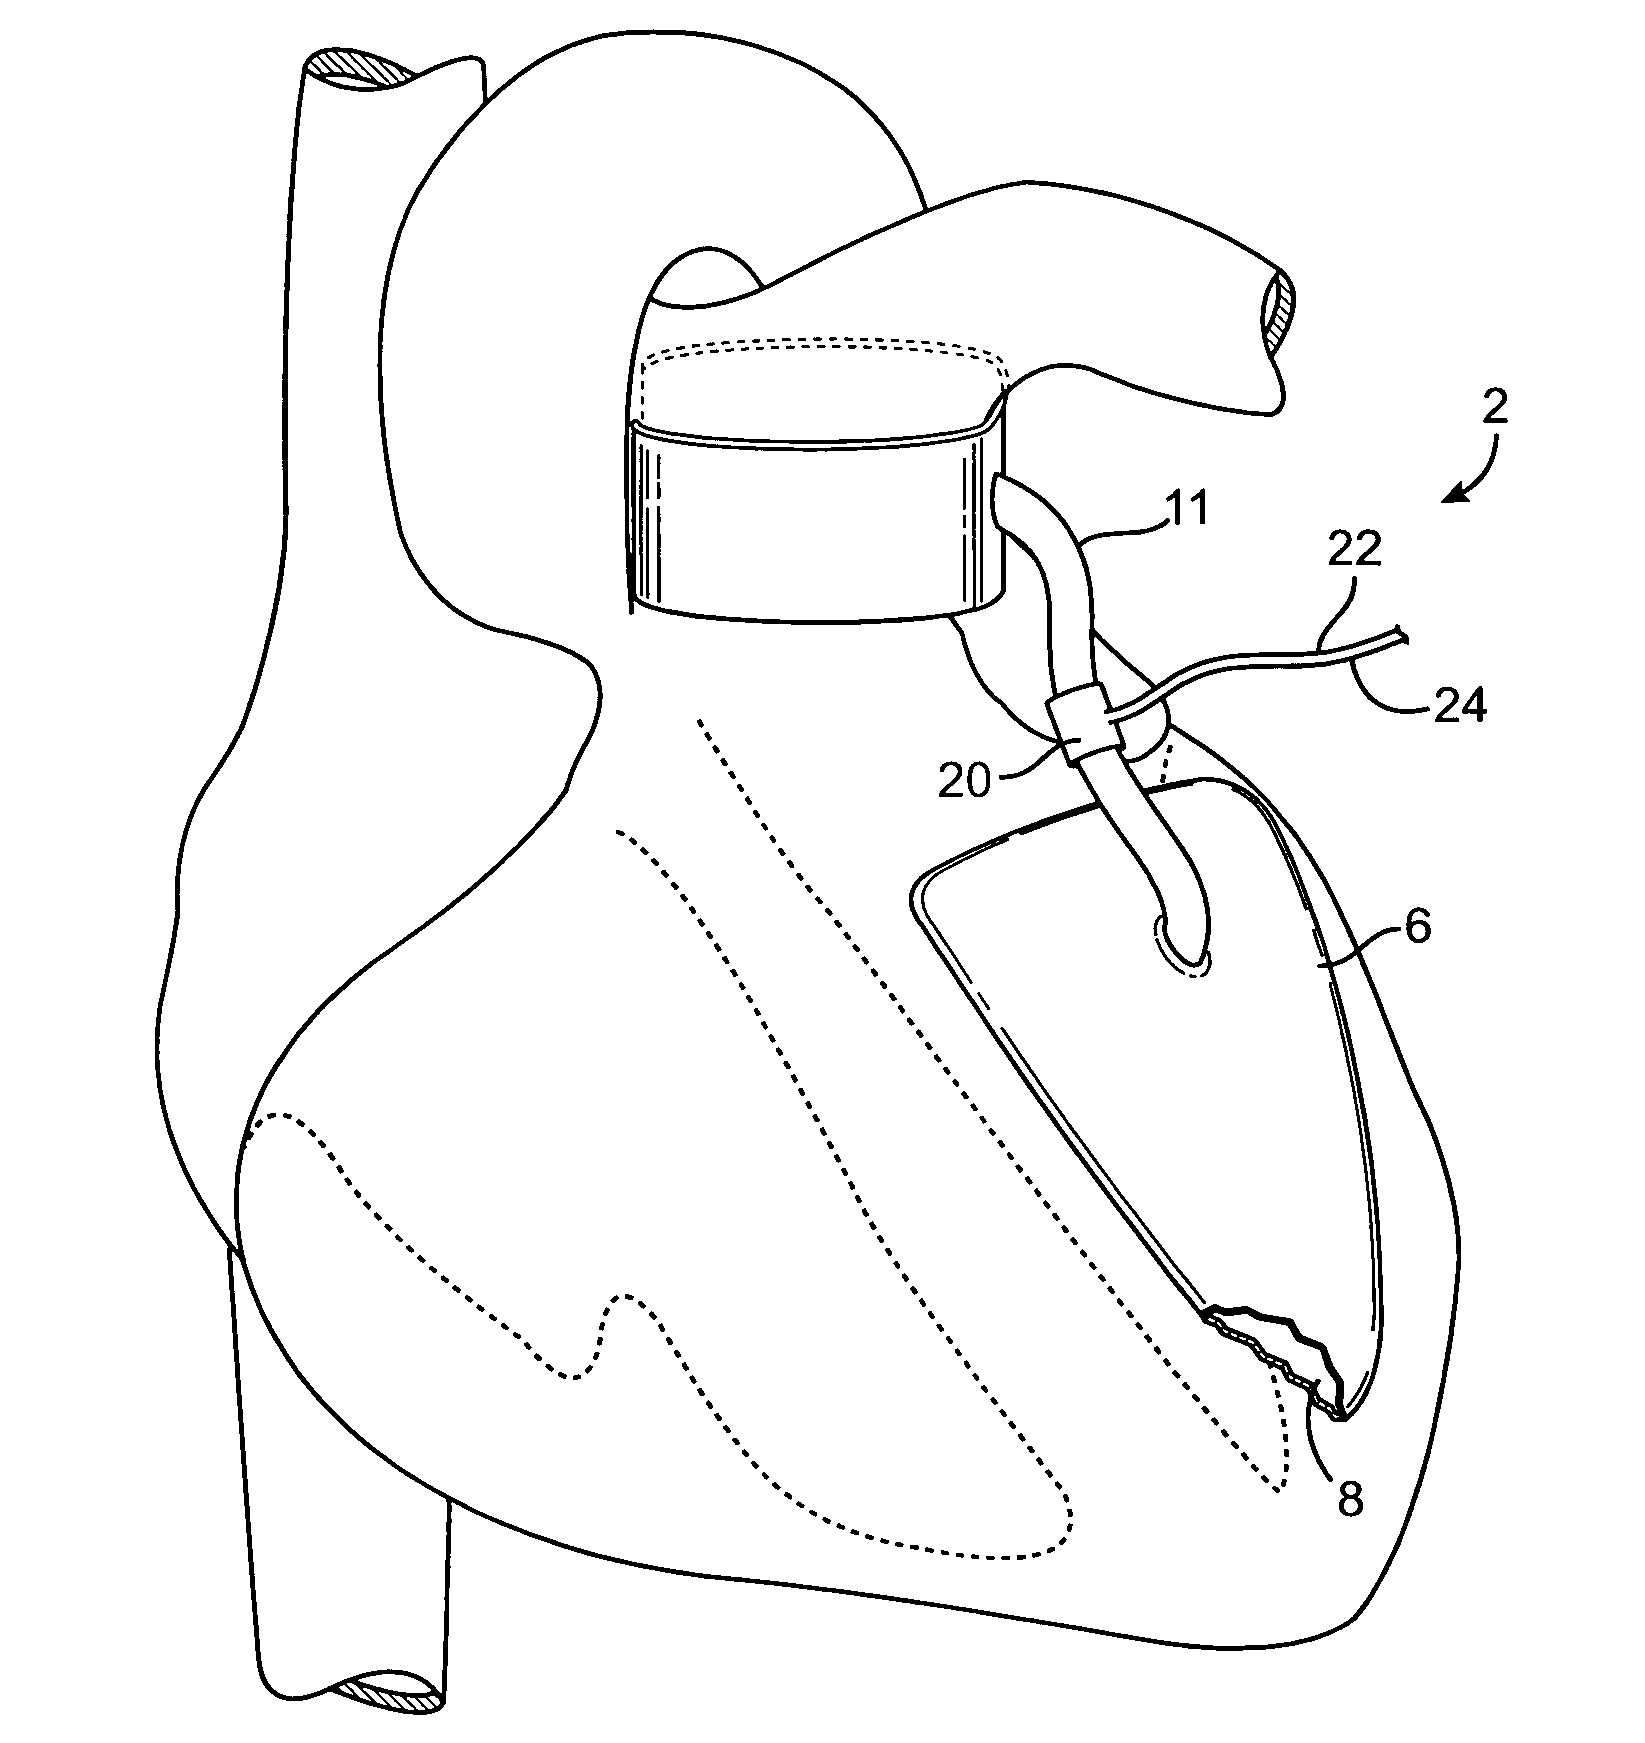 Devices and methods for absorbing, transferring and delivering heart energy